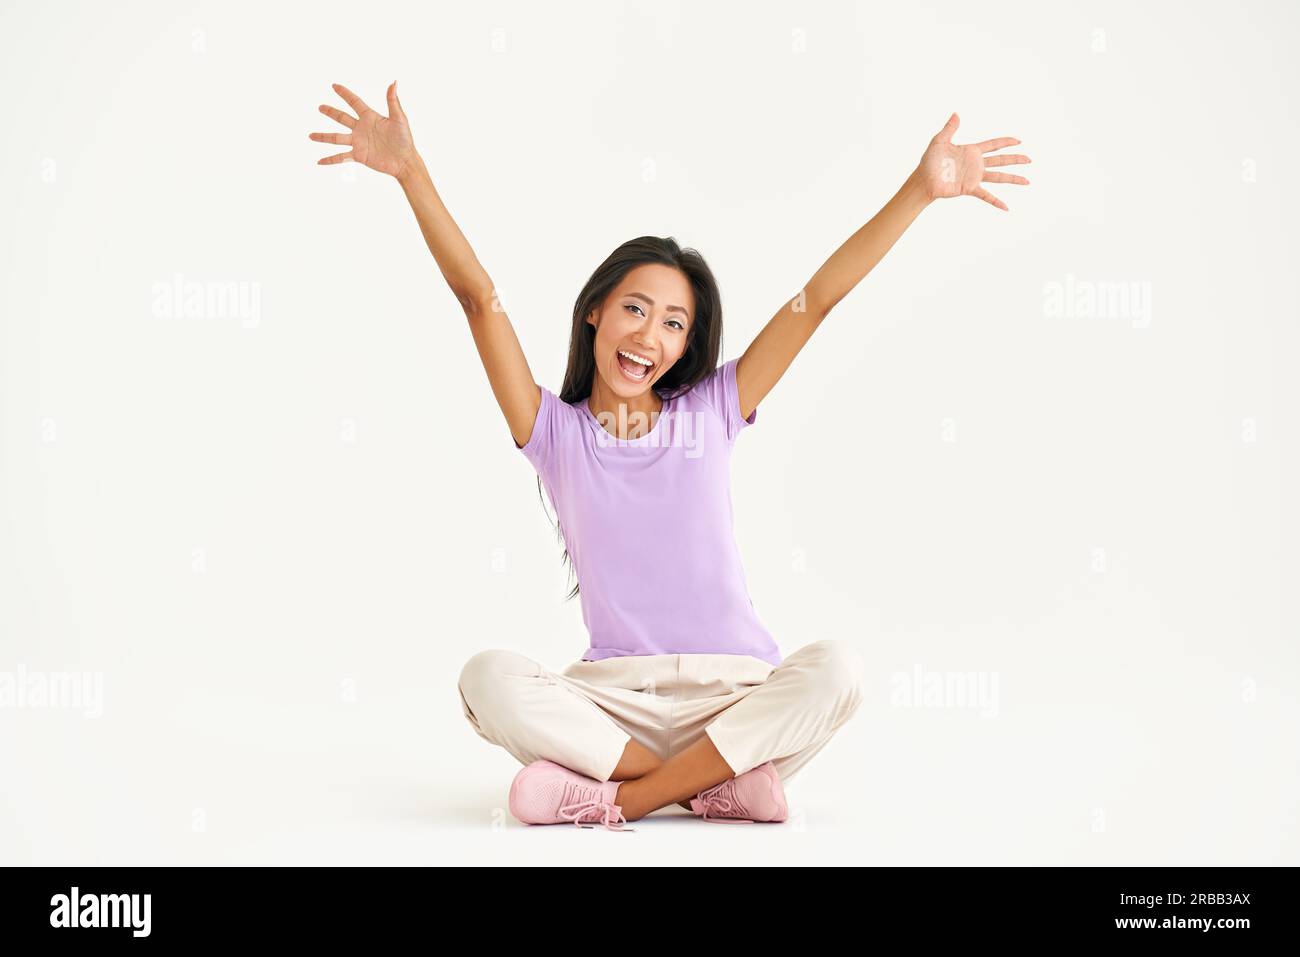 Smiling young asian woman raised arms up screaming and celebrating while sitting sitting on floor with legs crossed over white background Stock Photo